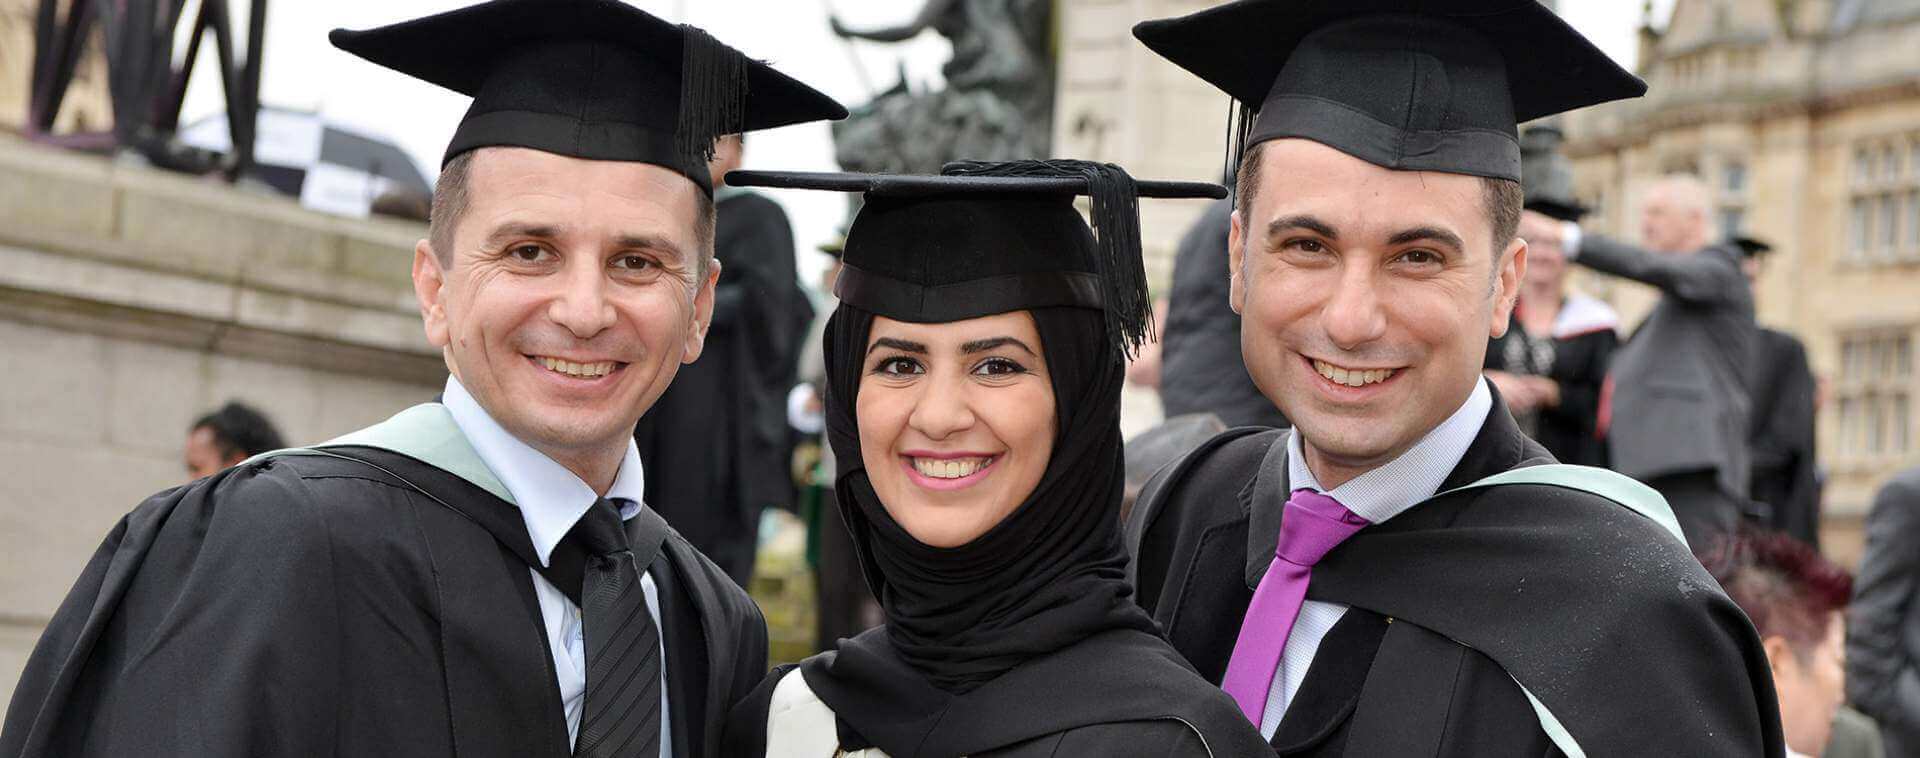 Group of three graduates in robes